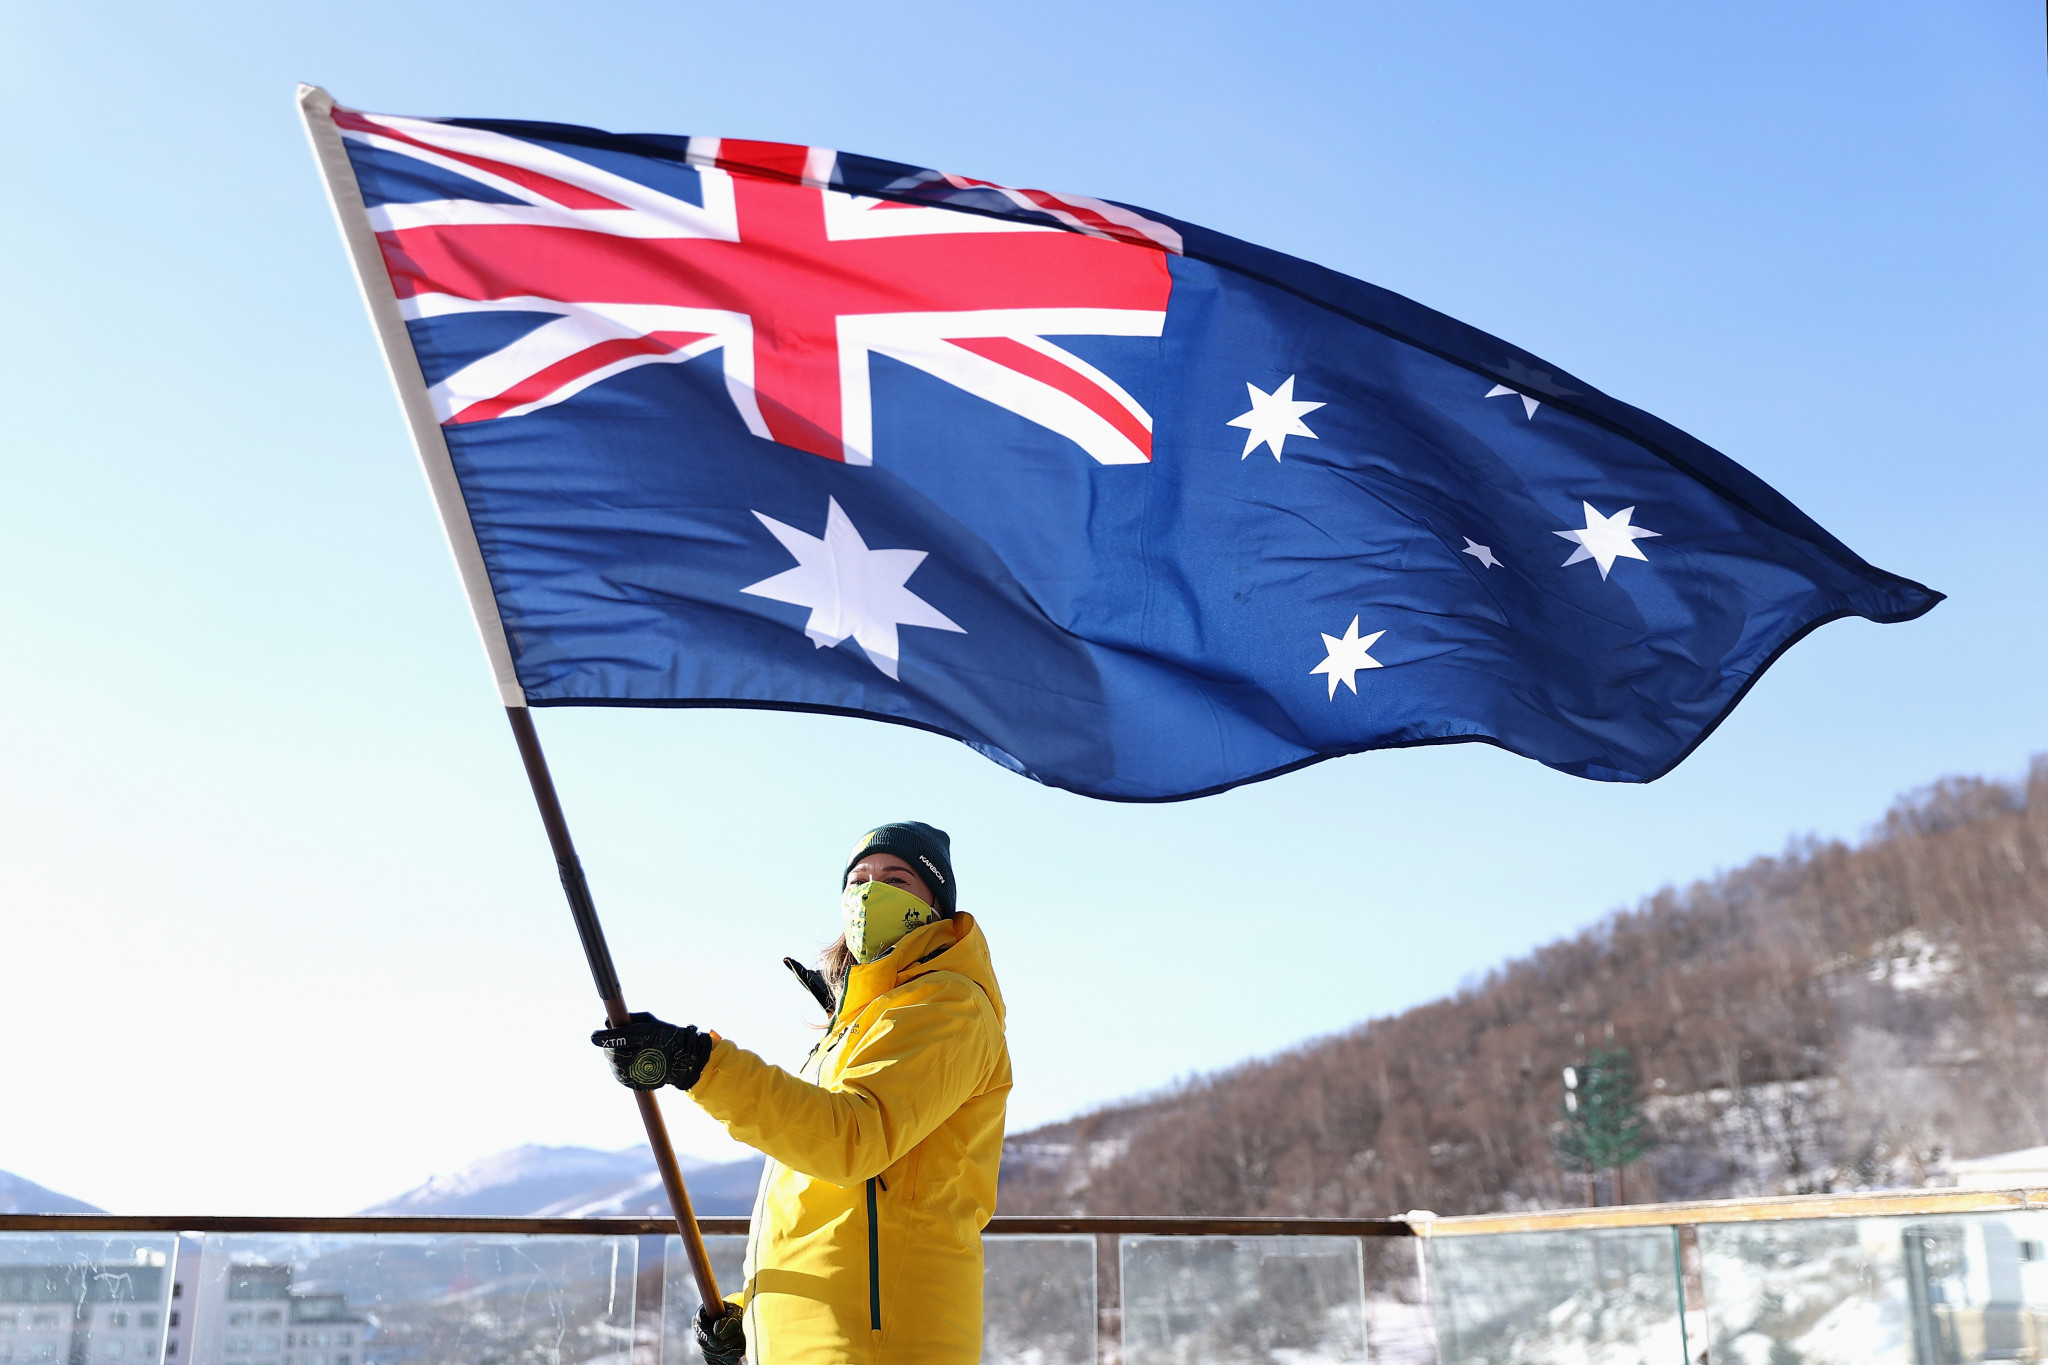 Sami Kennedy-Sim has been selected as Australia's flagbearer at her third Olympics for the Closing Ceremony of Beijing 2022 ©Getty Images 